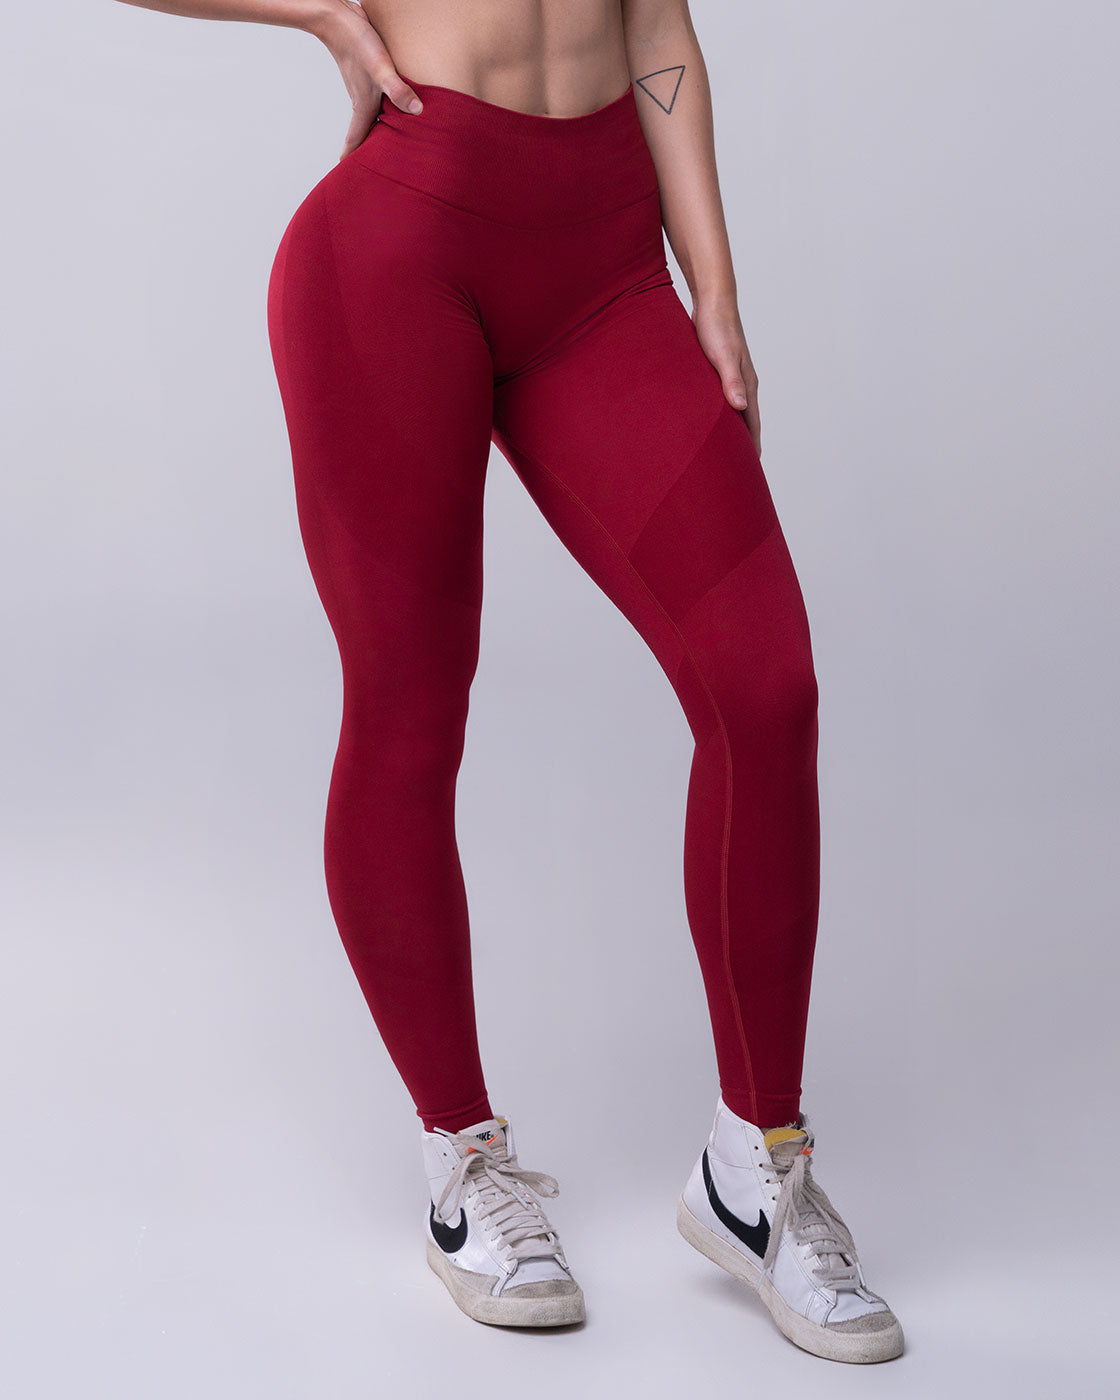 Synergy Cherry Red Seamless Leggings, Violate The Dress Code